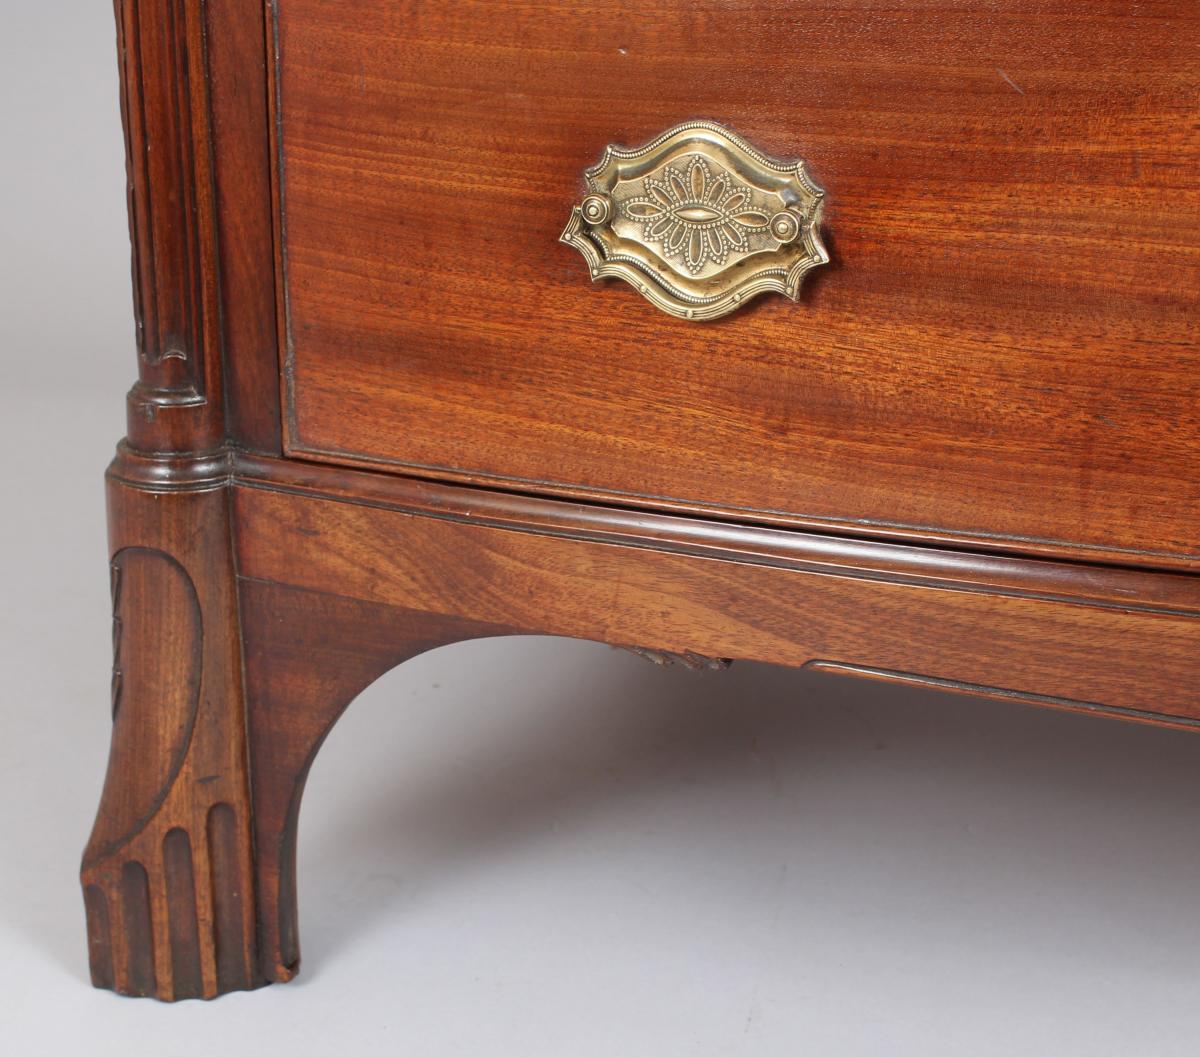 Fine and rare George III period mahogany bow-fronted chest-of-drawers of Channel Islands origin